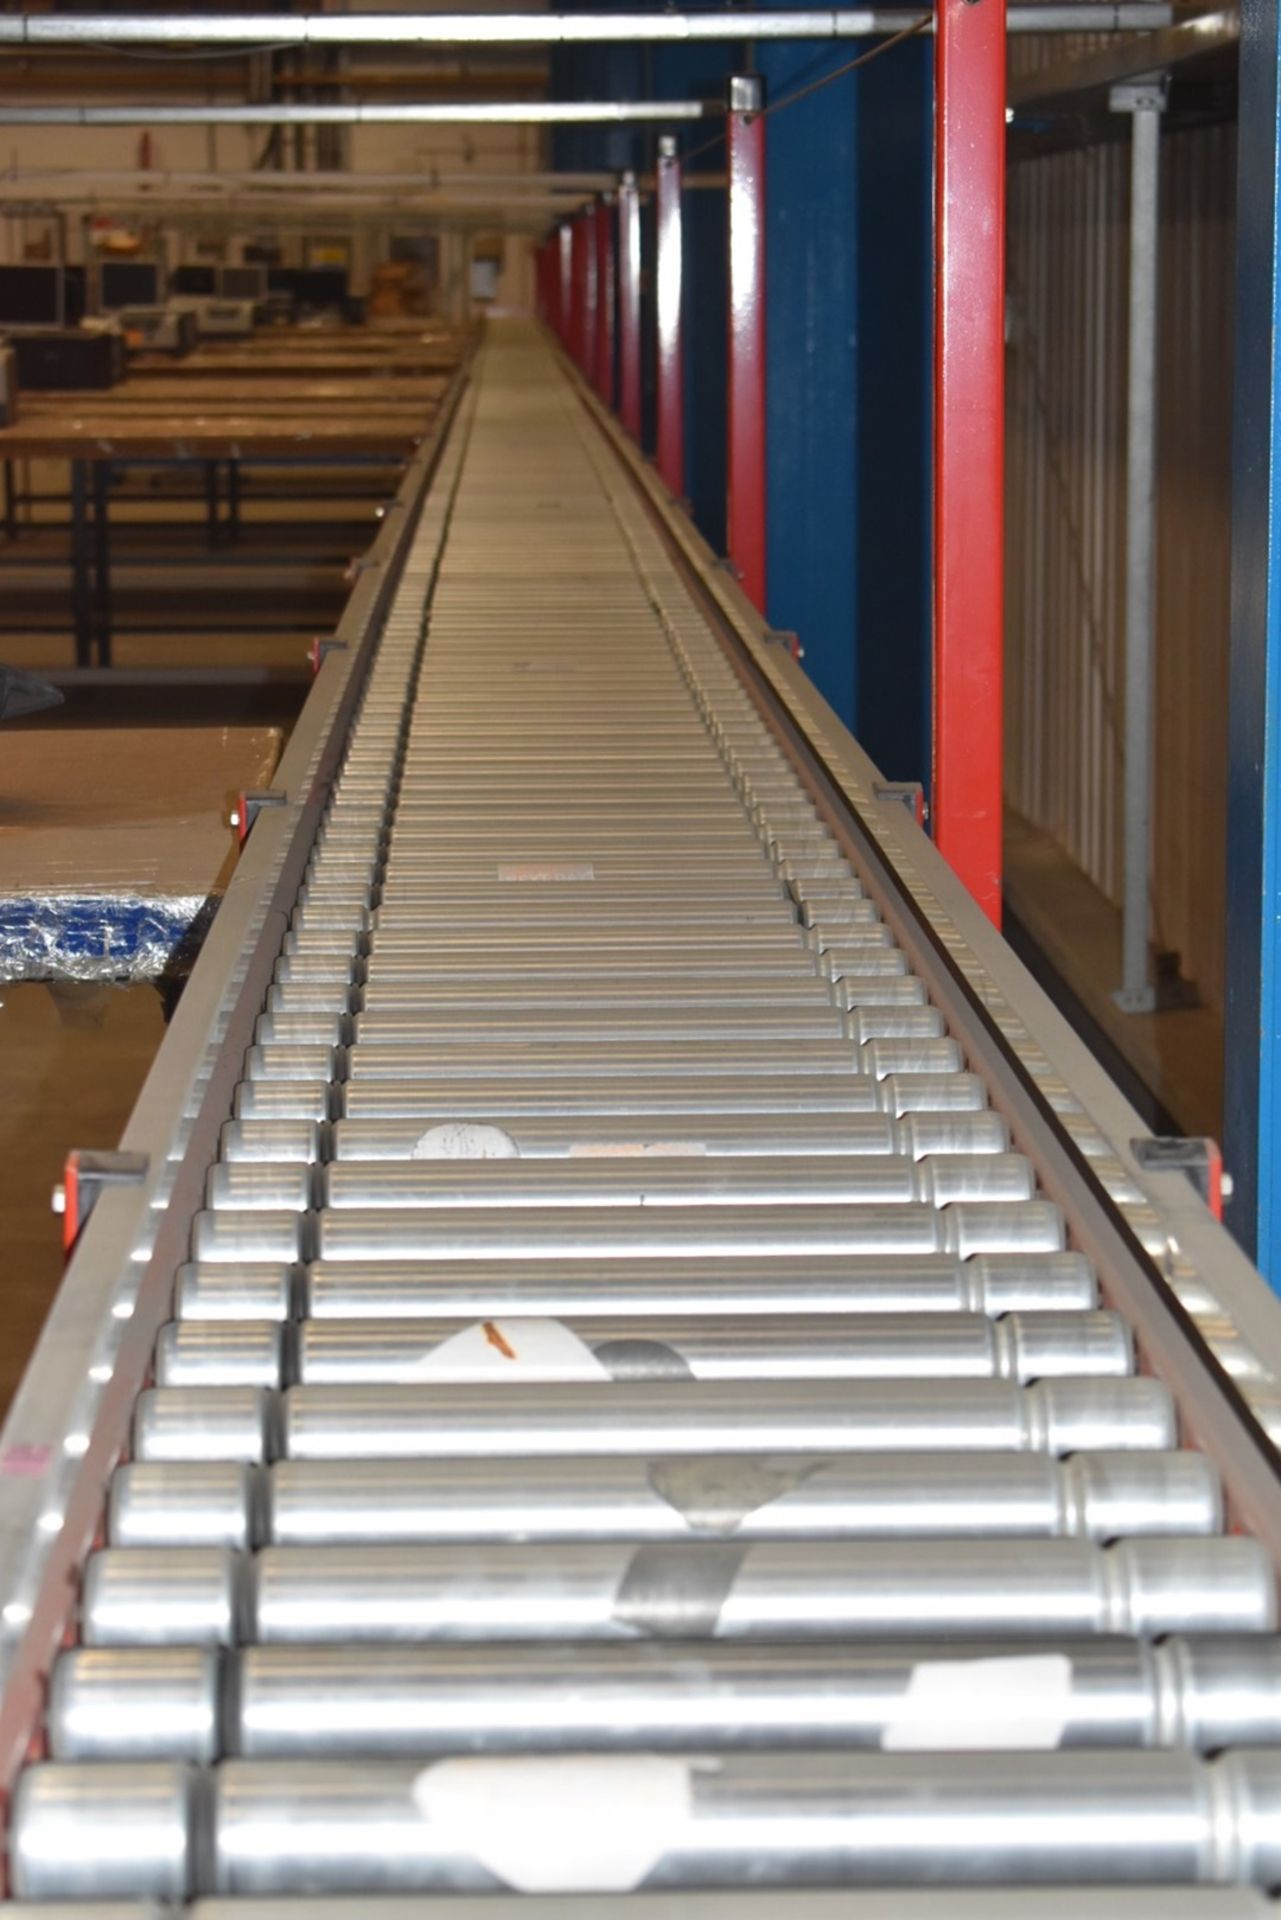 1 x Powered Conveyor Roller System - To Be Removed From Distribution Centre - Approx 140ft in Length - Image 18 of 22